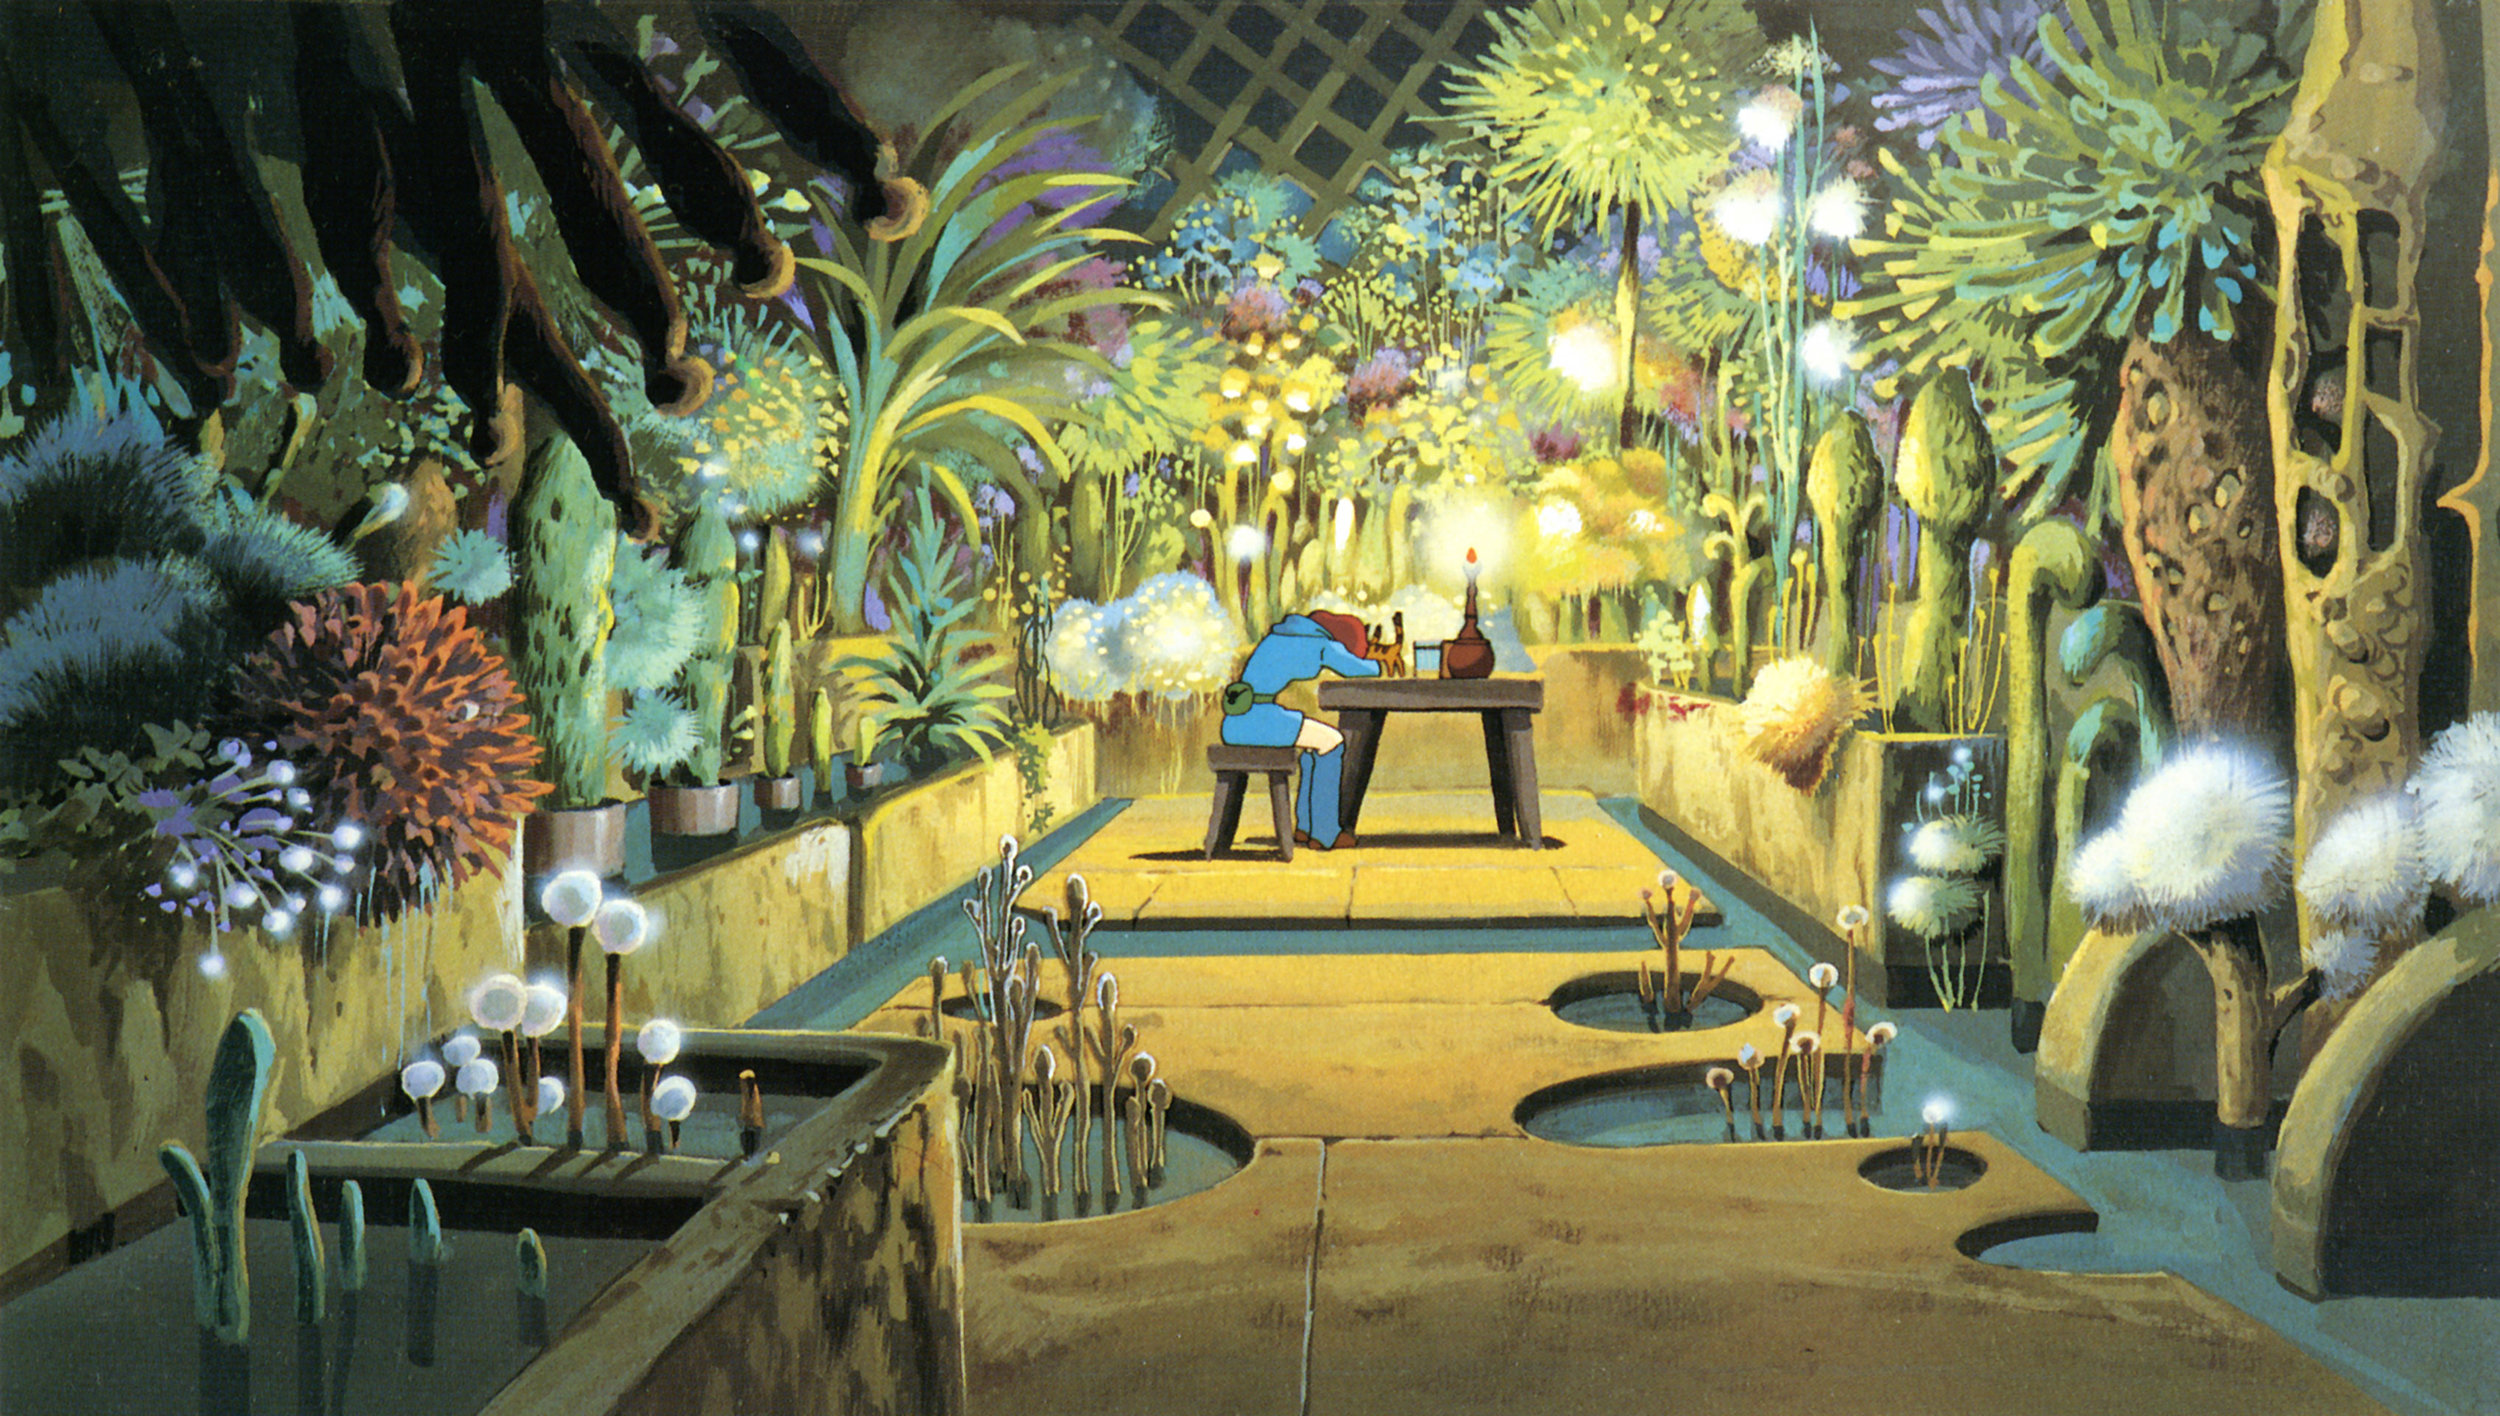  Screenshot from  Nausicaa of the Valley of the Wind.  